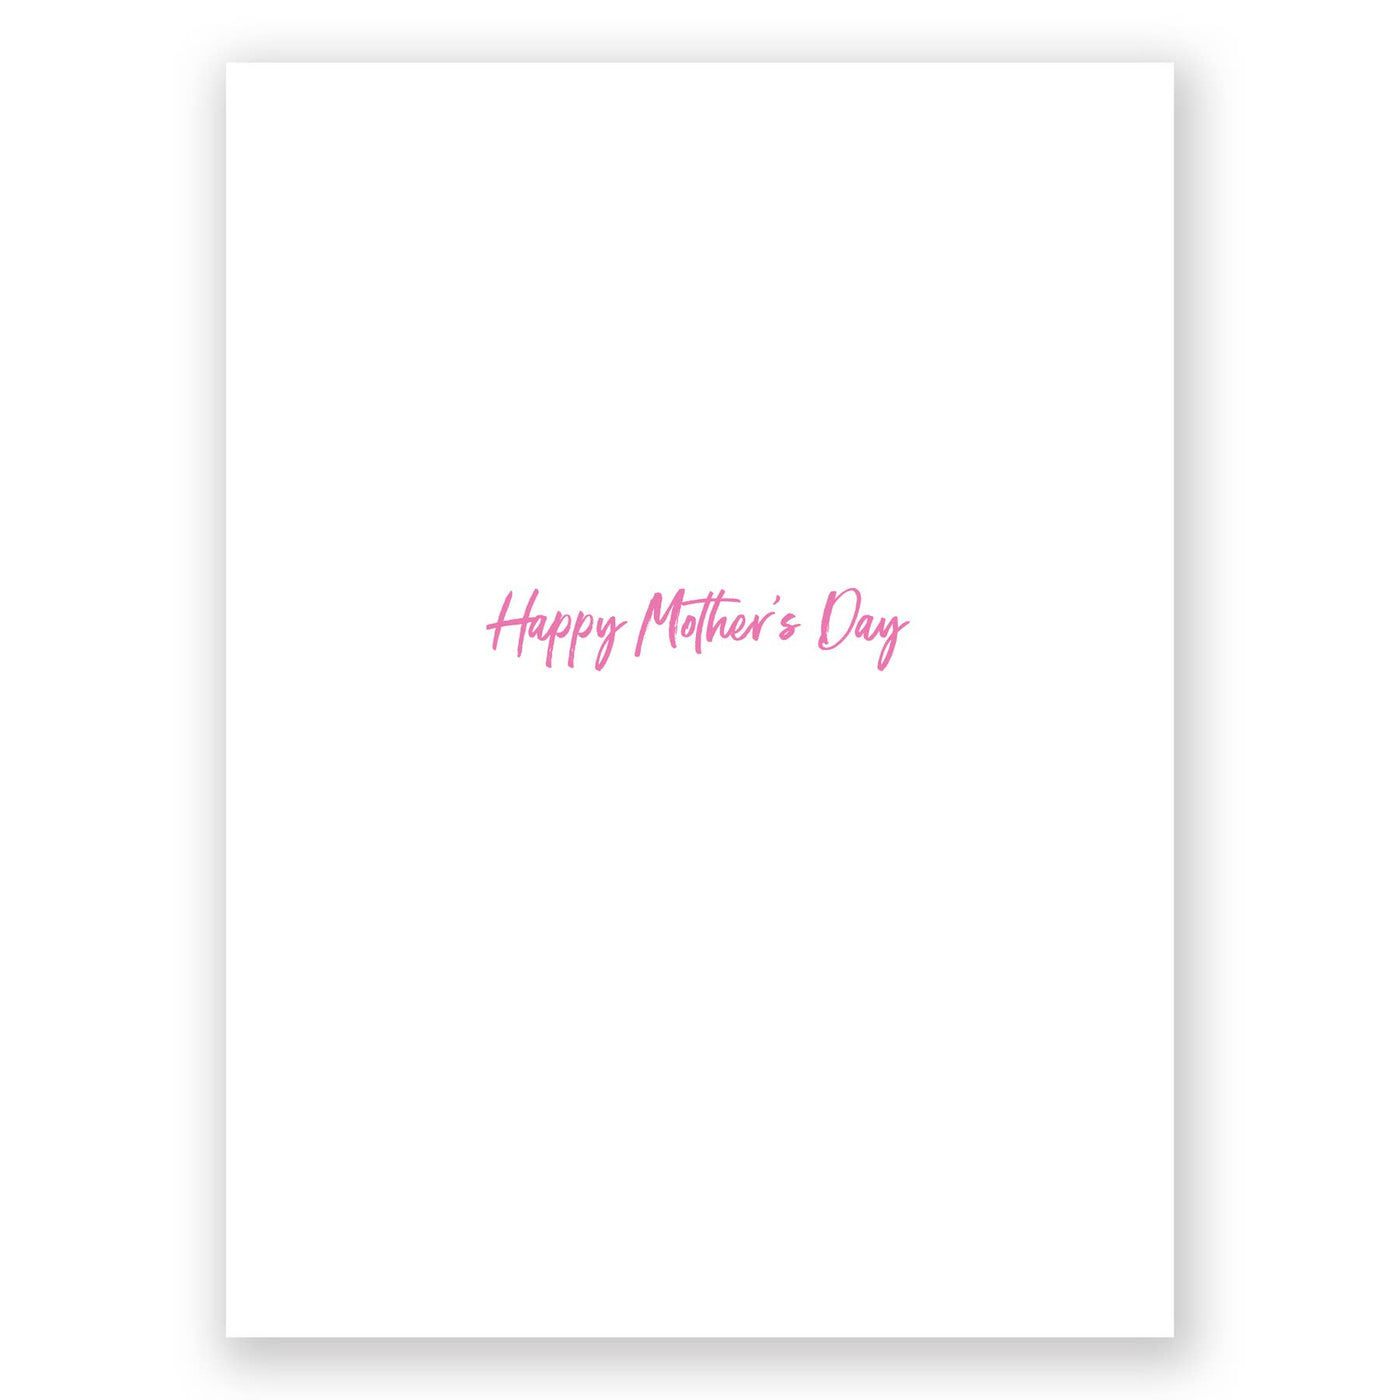 Floral Vase With Cranes Mother's Day Greeting Card